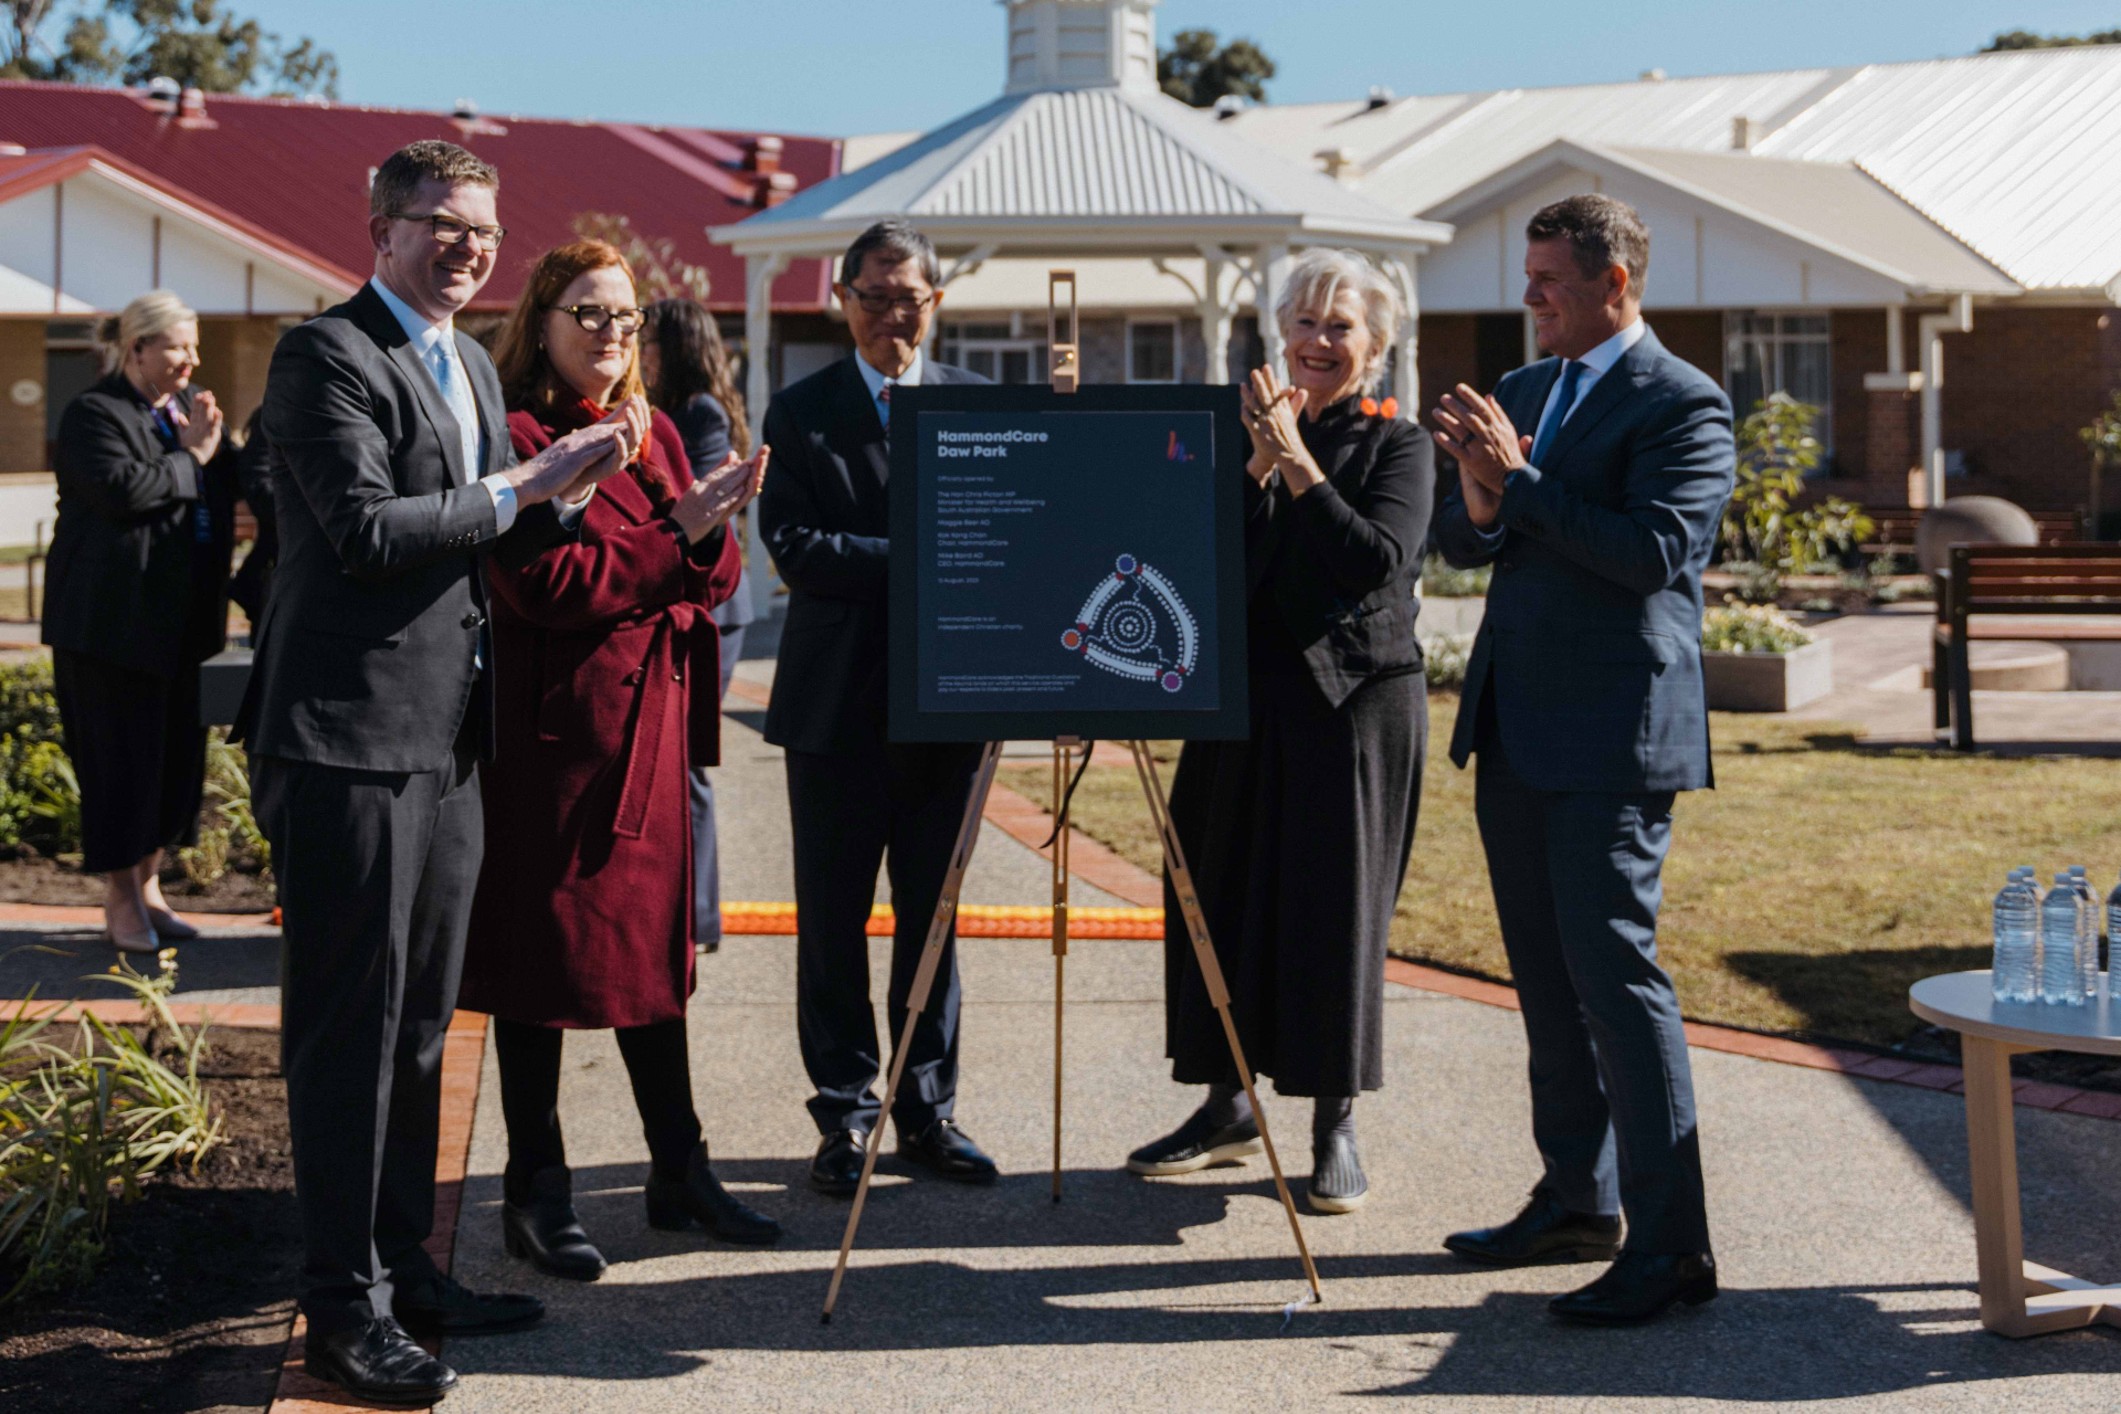 HammondCare Daw Park opening with (l-r) Minister Chris Picton, Louise Miller-Frost MP, HammondCare Chair Kok Kong Chan, Maggie Beer and HammondCare CEO Mike Baird